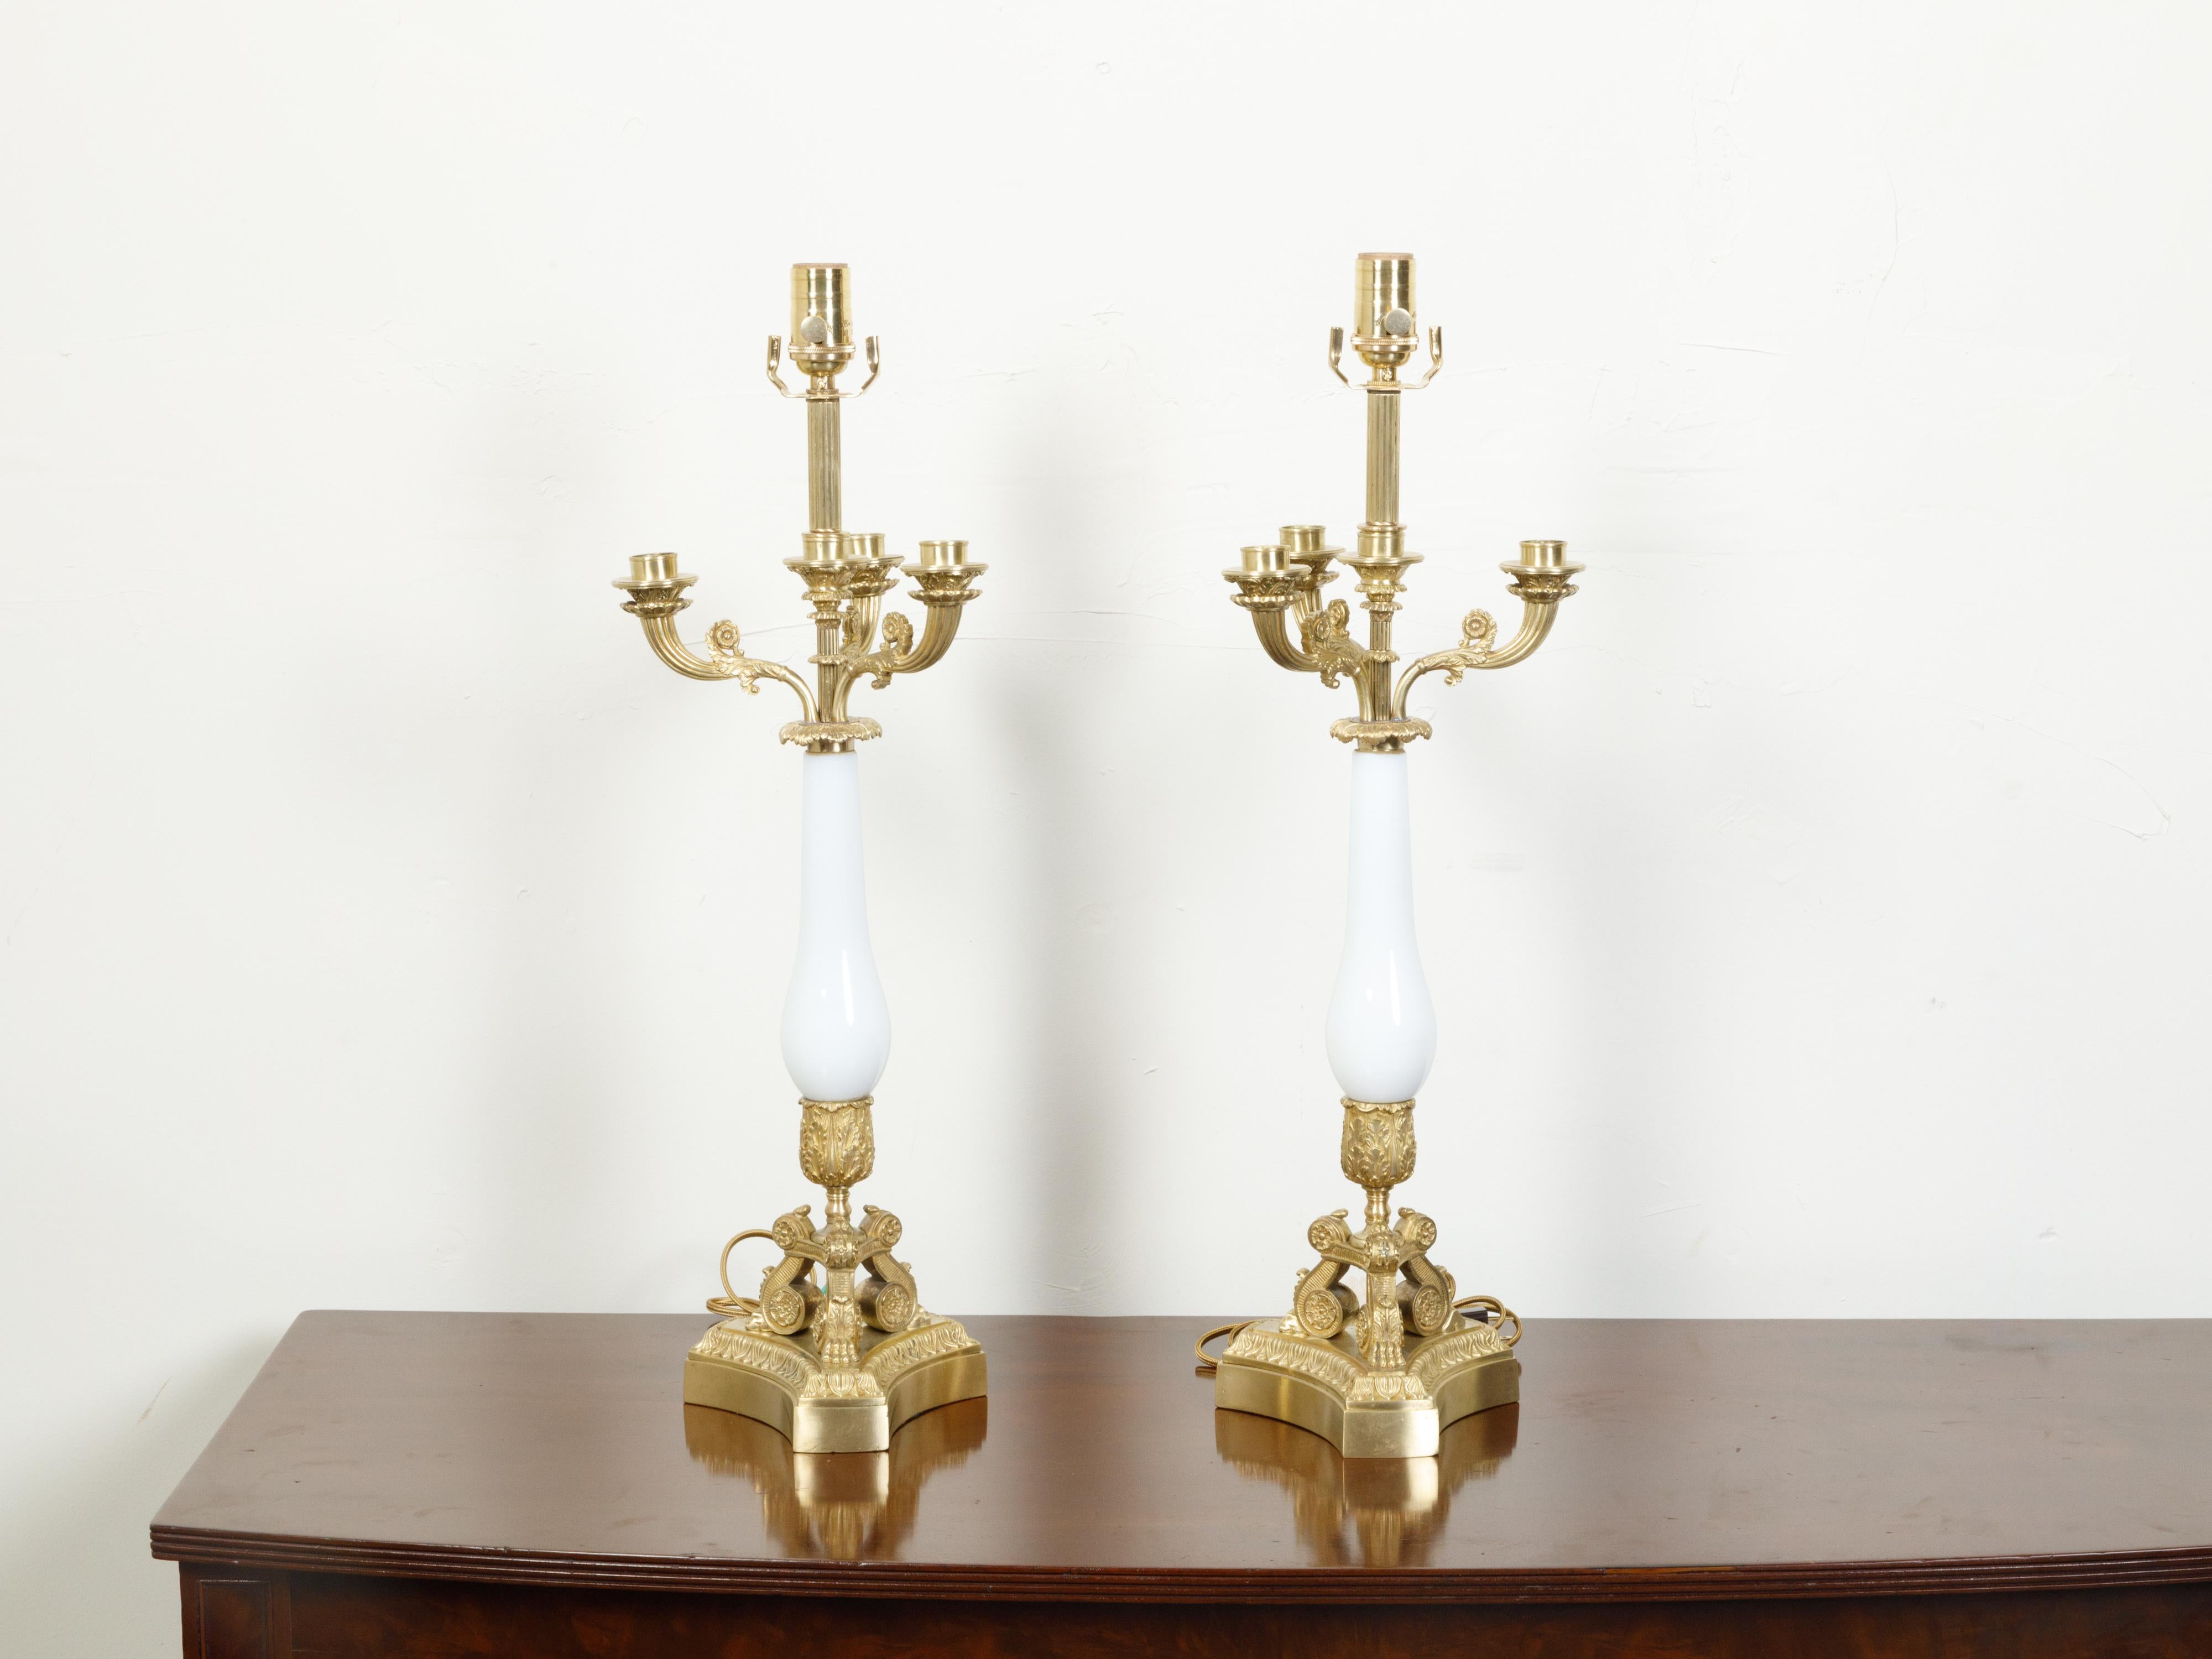 A pair of French Empire style bronze and opaline glass candelabra table lamps from the early 20th century, with scrolling arms and volutes. Created in France during the first quarter of the 20th century, each of this pair of table lamps attracts our